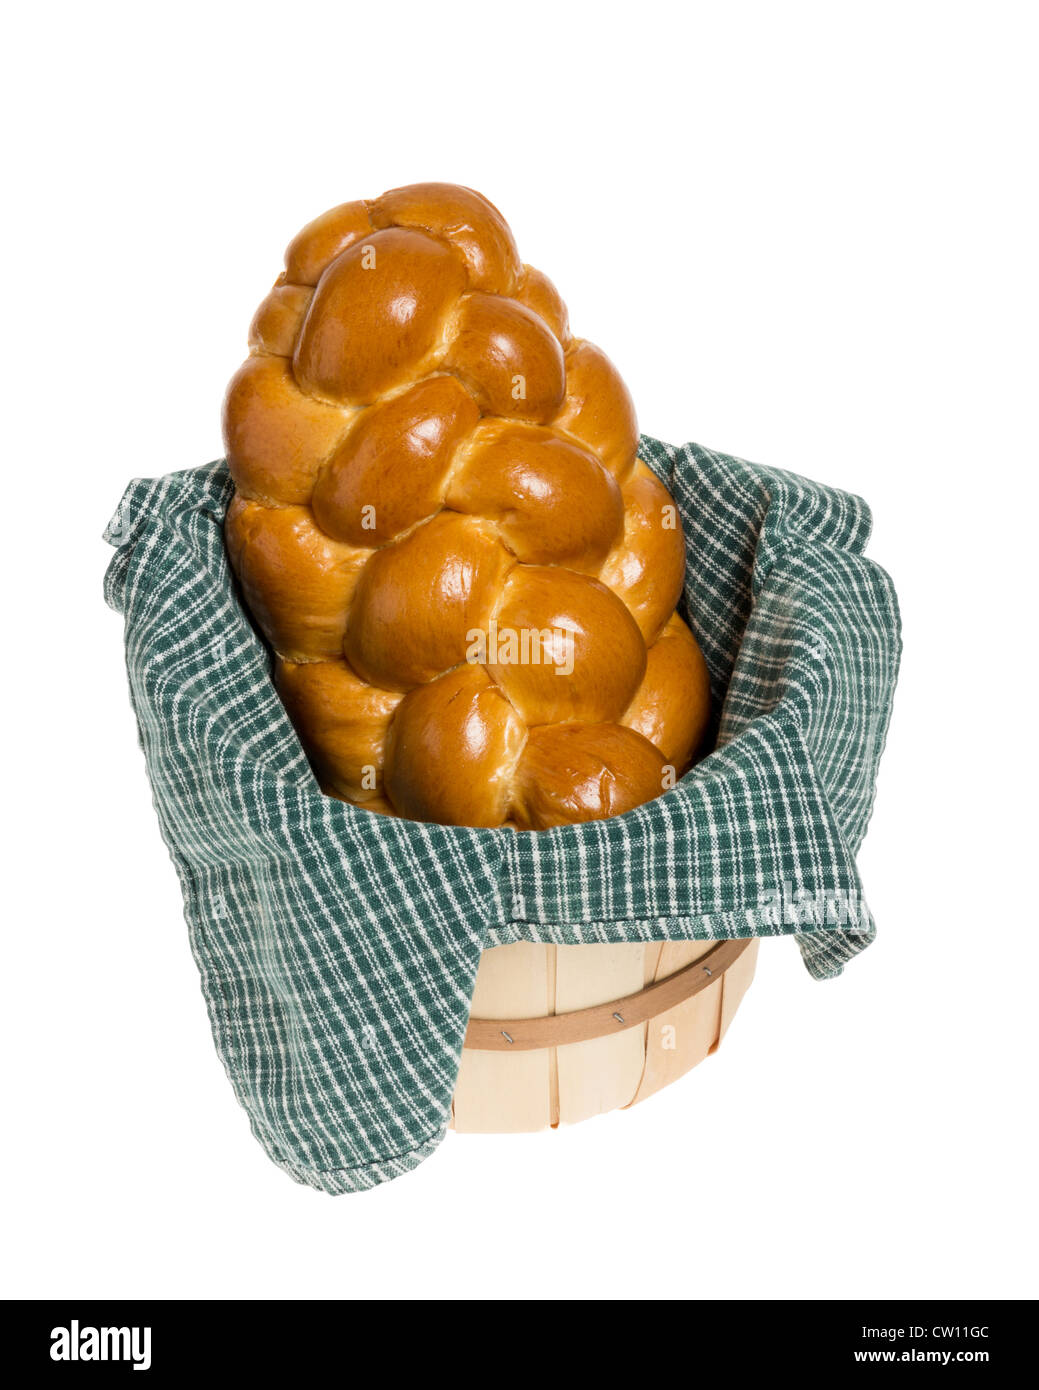 Challah bread in wicker basket with green cloth Stock Photo